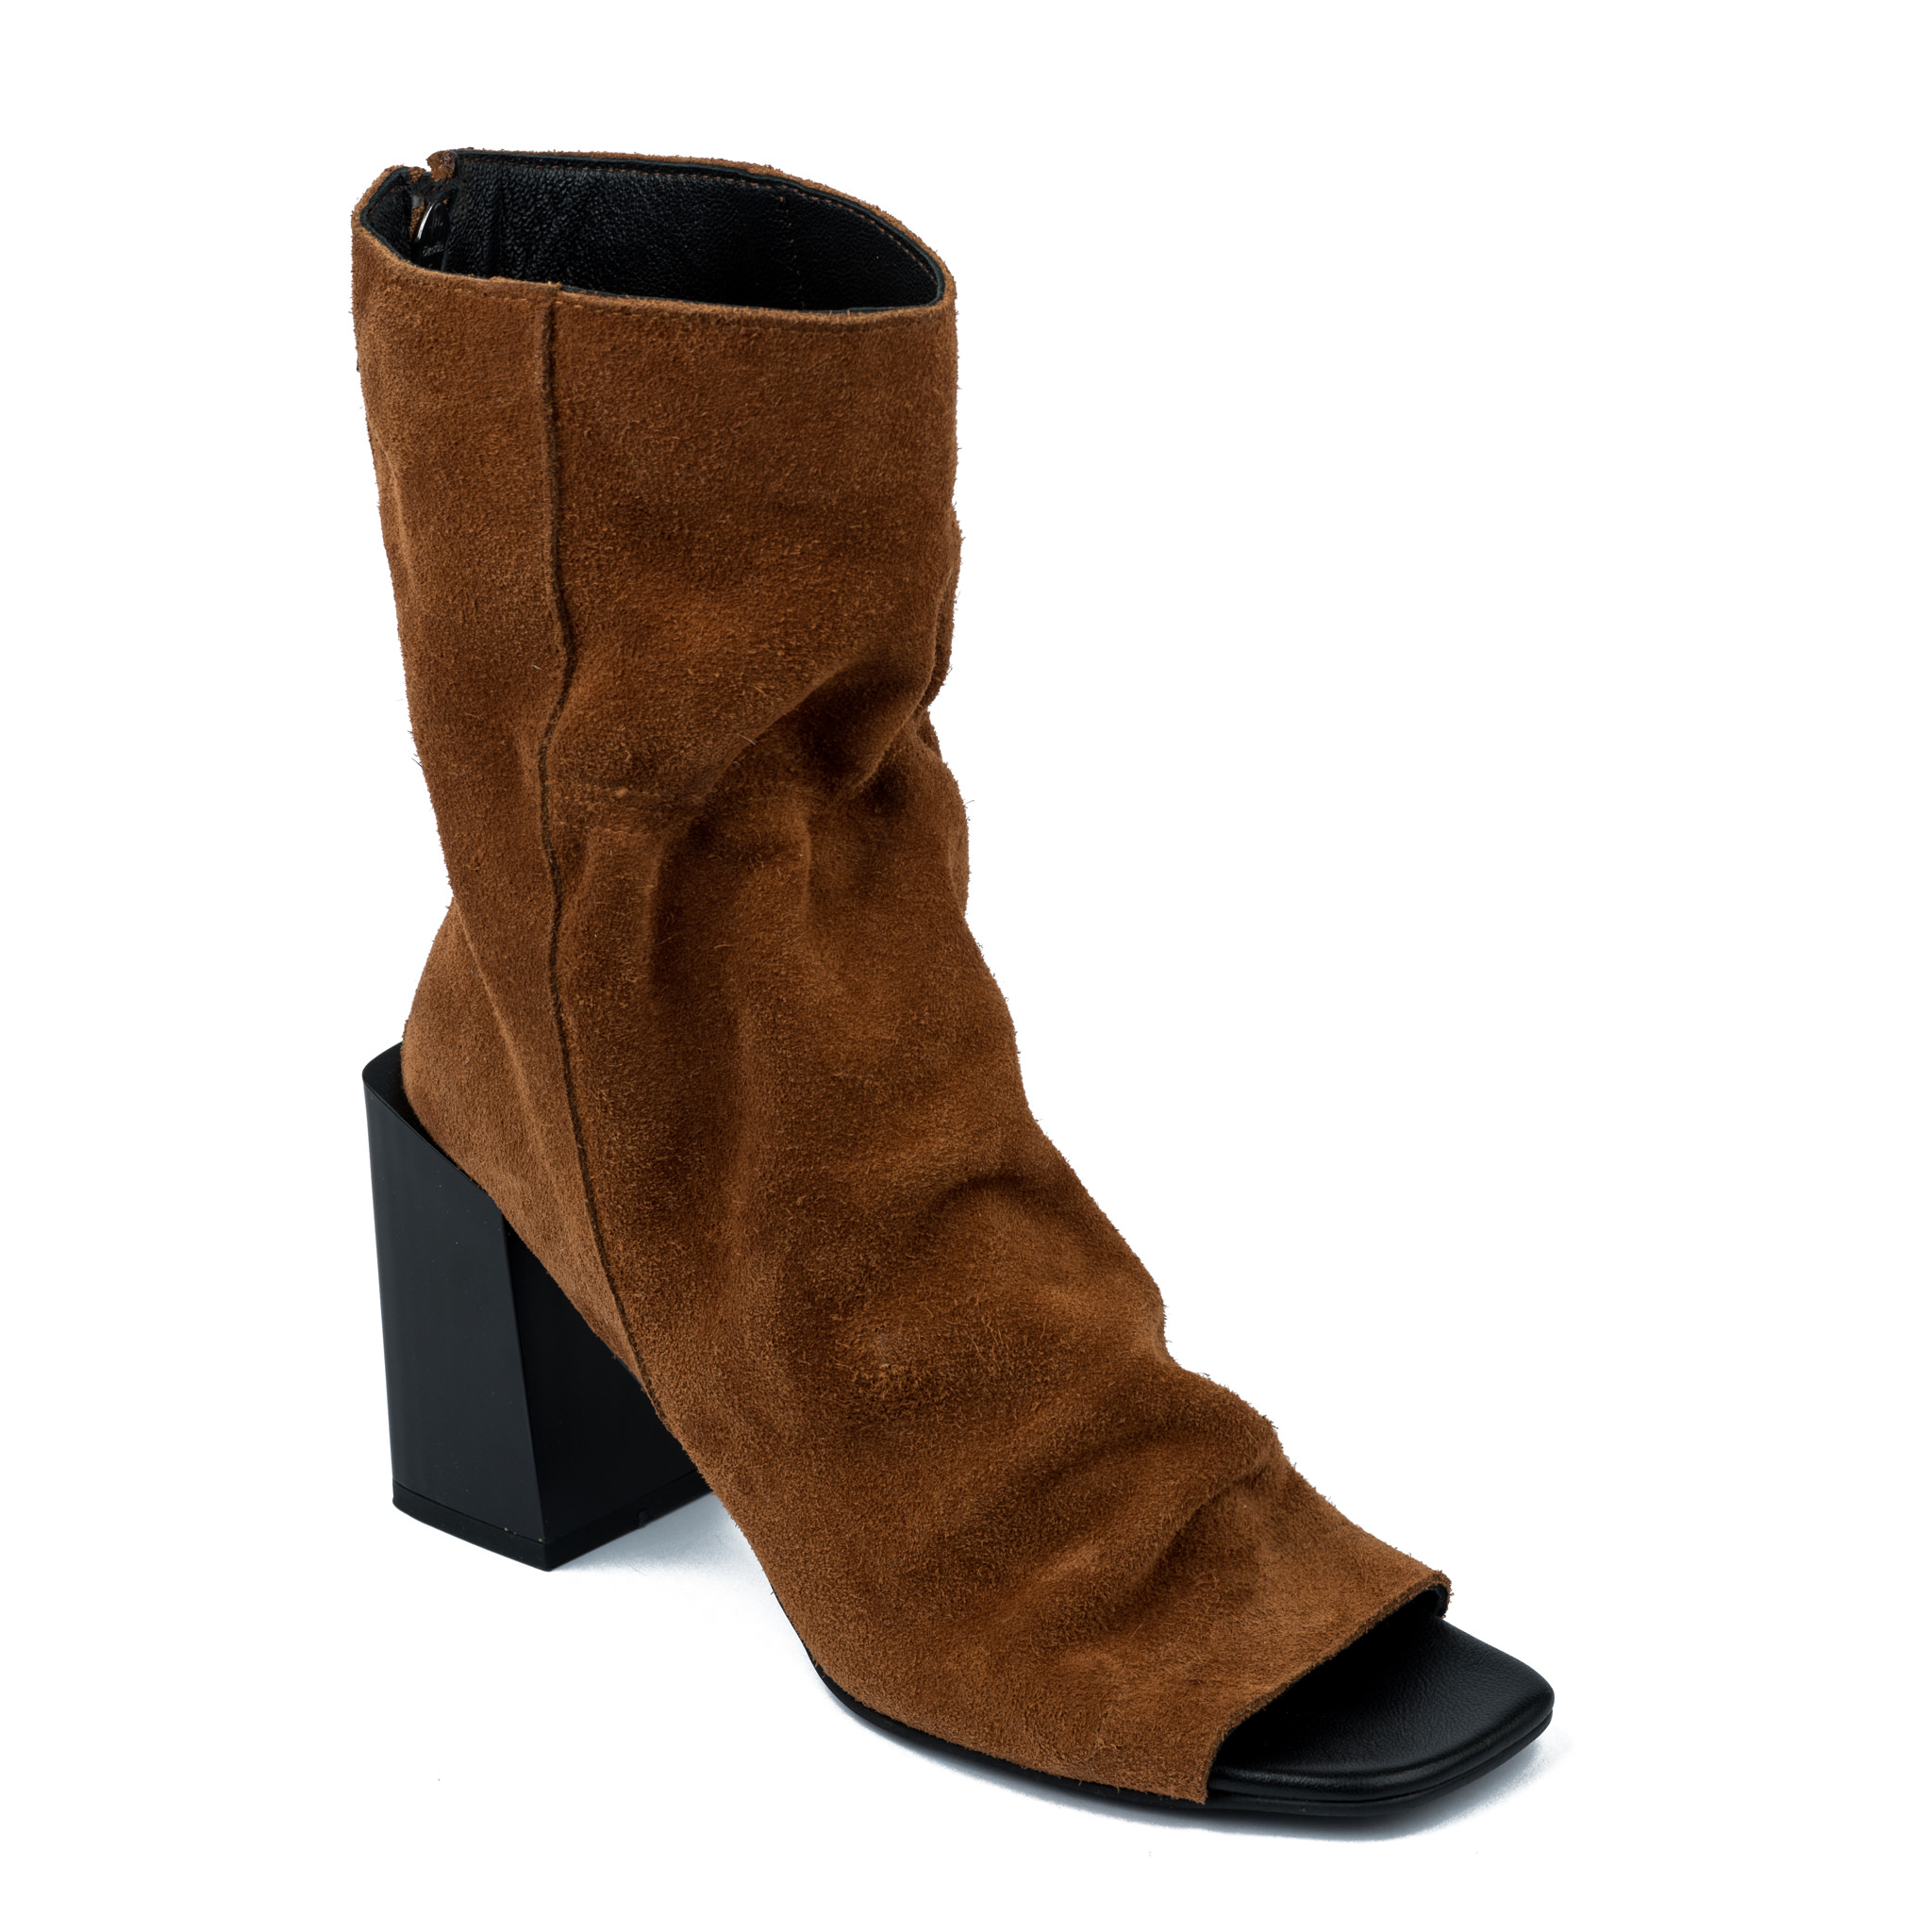 Leather summer boots A634 - CAMEL